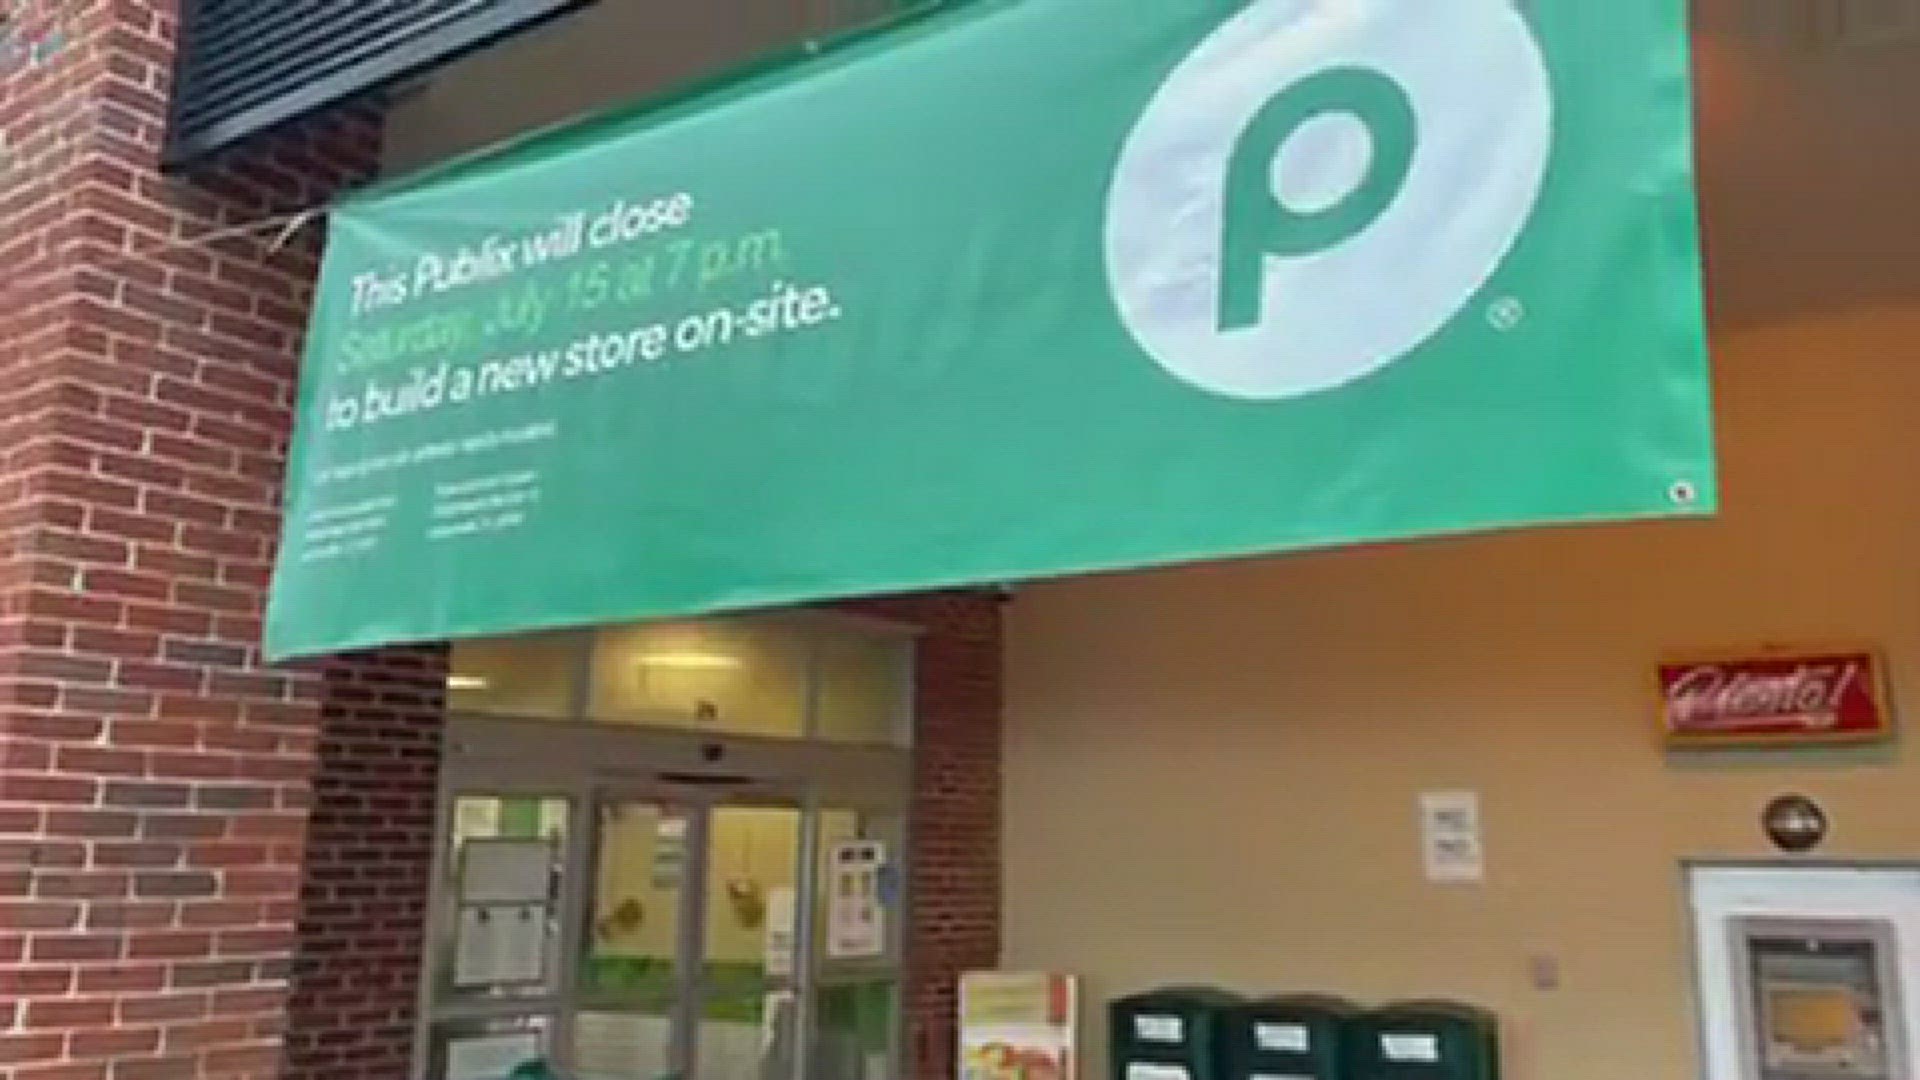 The Publix located at Atlantic Boulevard and Hodges will close Saturday for the foreseeable future as the store undergoes some major upgrades.
Credit: Harold Goodridge